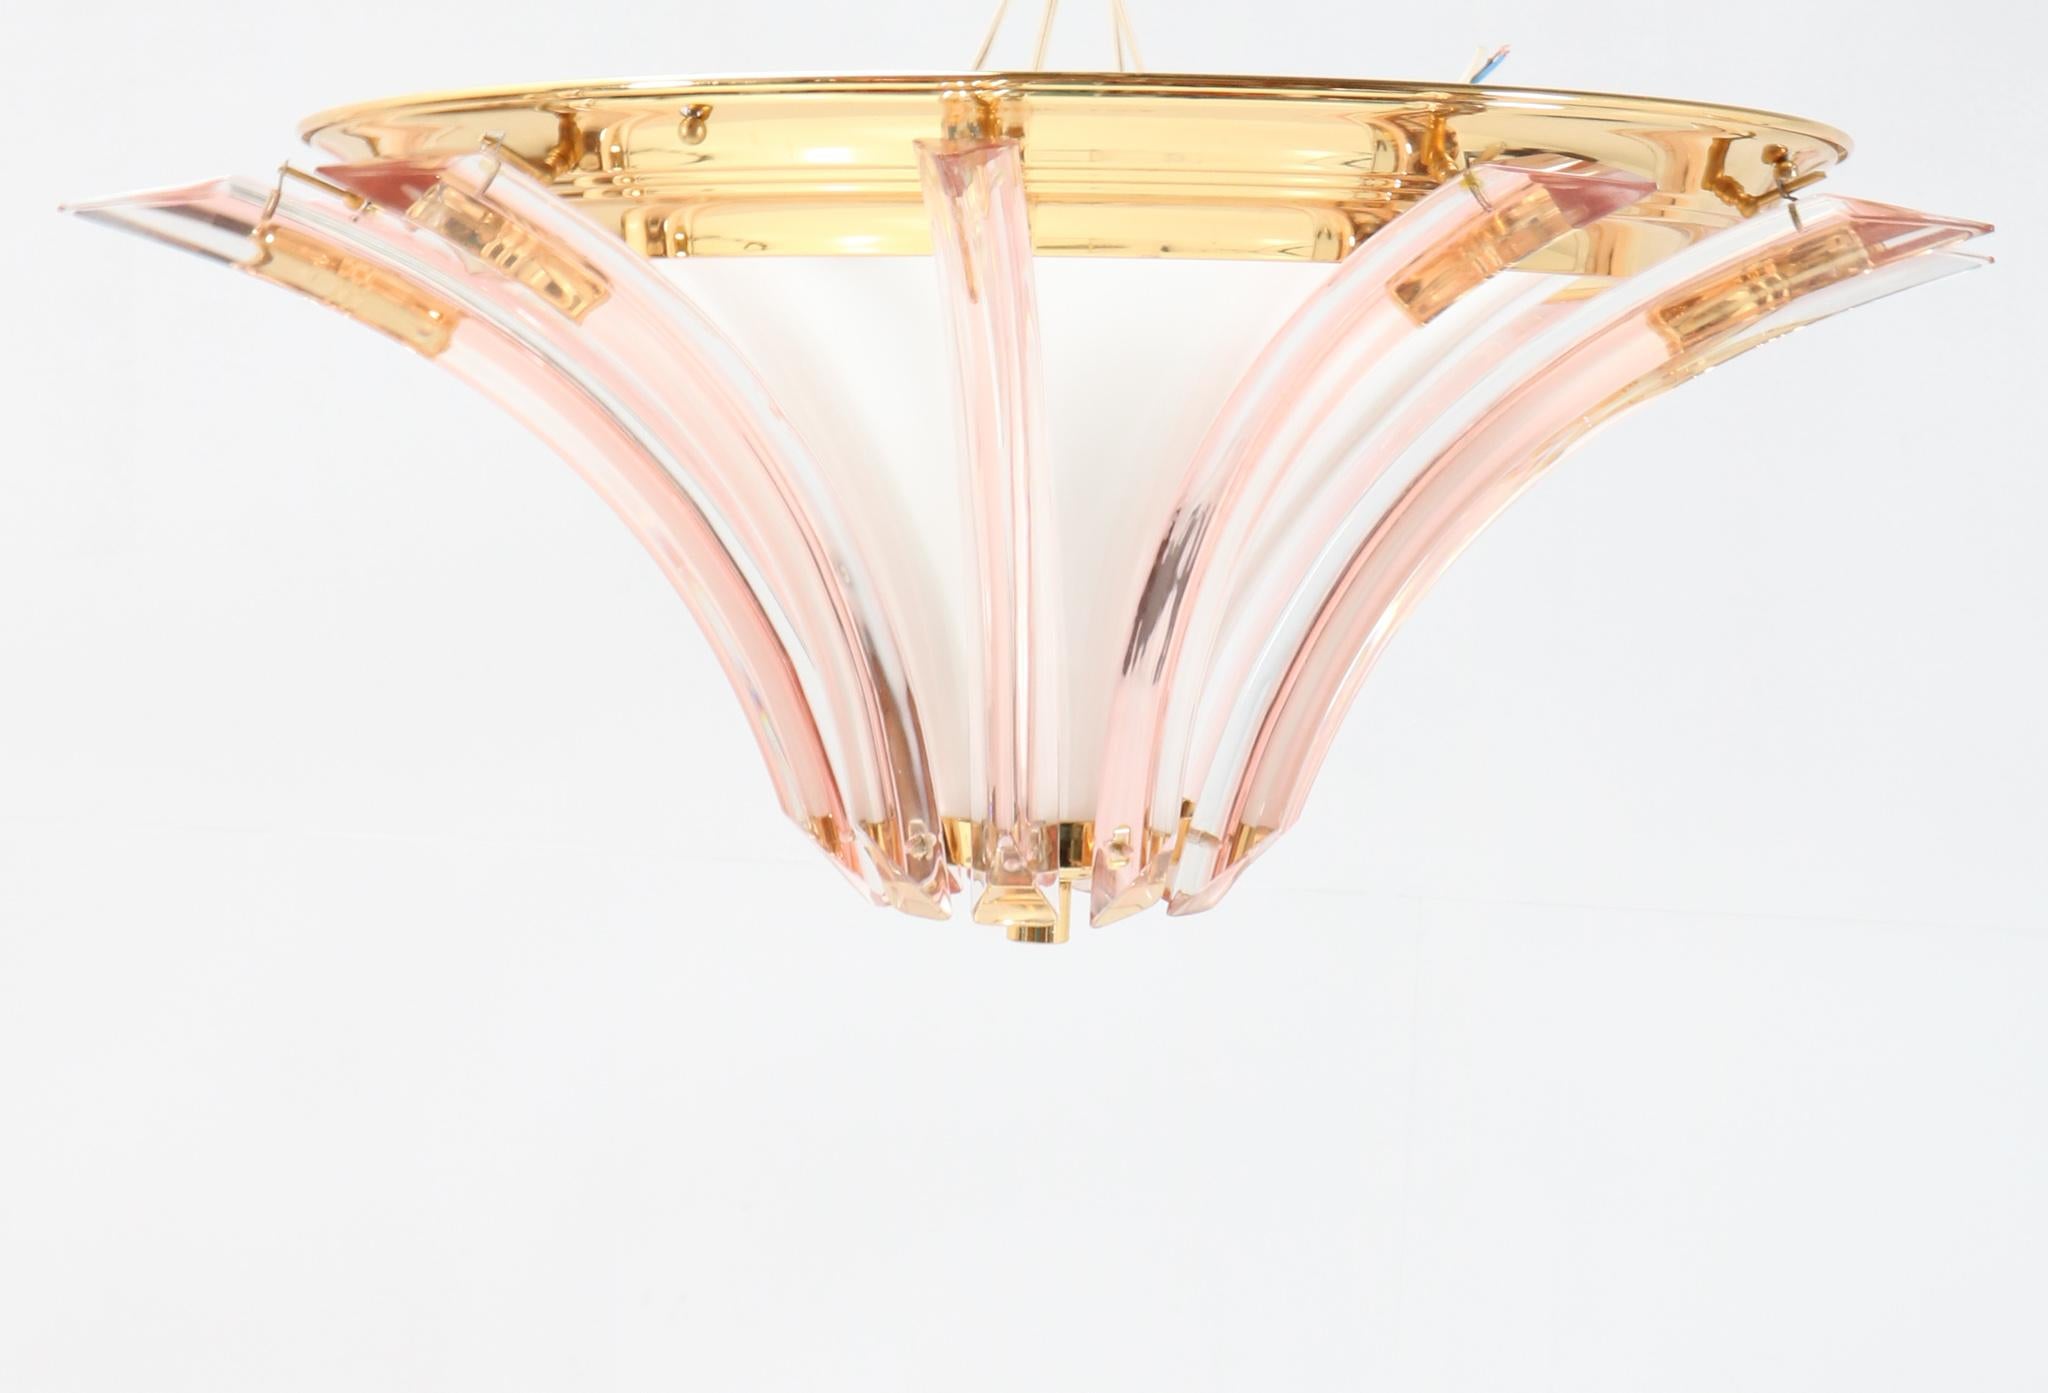 Magnificent and ultra rare Hollywood Regency flush mount ceiling light.
Striking Italian design from the 1980s.
Brass frame with original milk glass shade and Murano glass elements.
Please note that we have three flush mount ceiling lights in